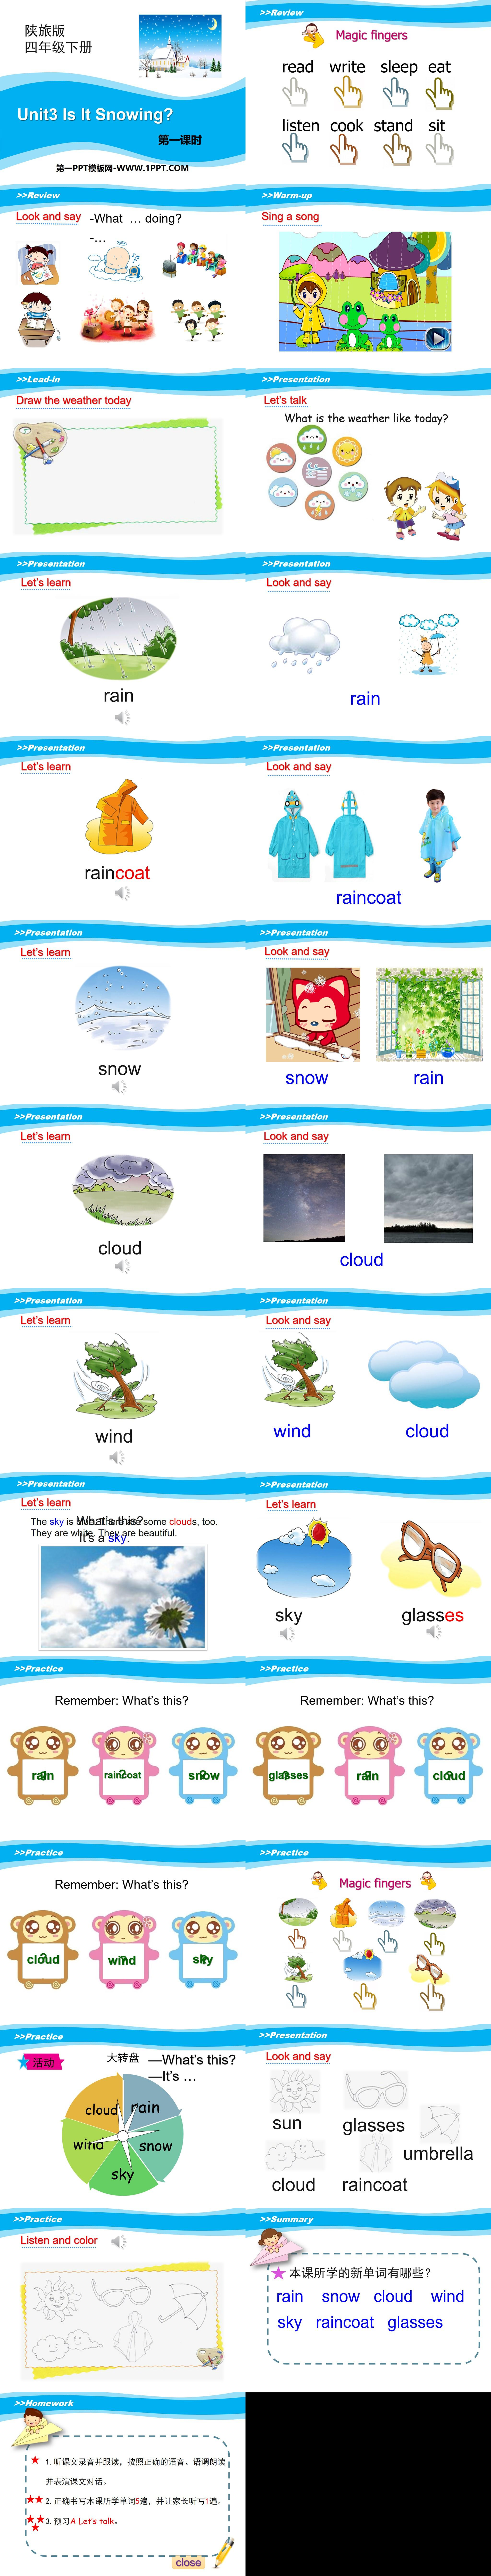 《Is It Snowing?》PPT
（2）